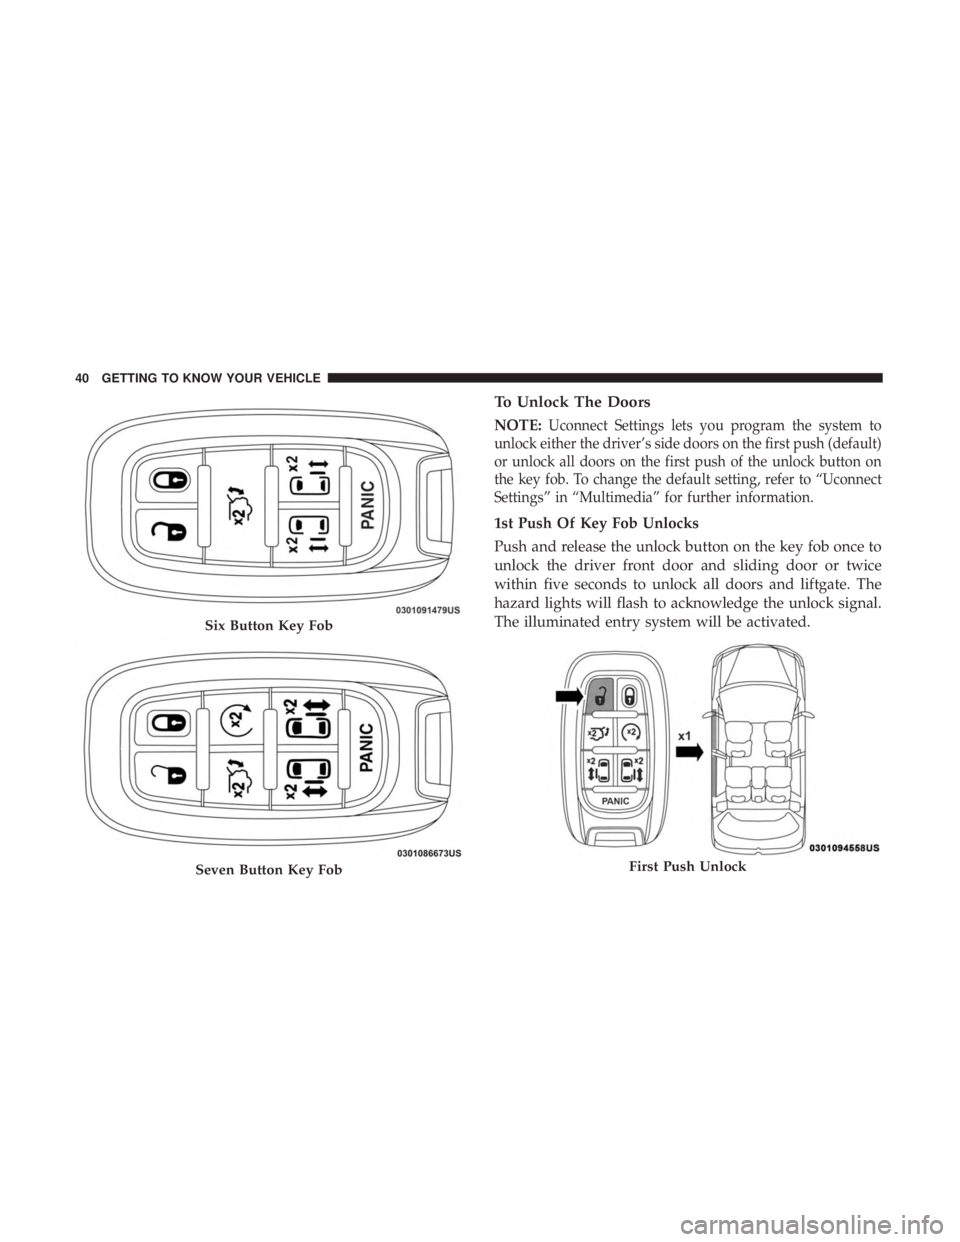 CHRYSLER PACIFICA HYBRID 2018  Owners Manual To Unlock The Doors
NOTE:Uconnect Settings lets you program the system to
unlock either the driver’s side doors on the first push (default)
or unlock all doors on the first push of the unlock button